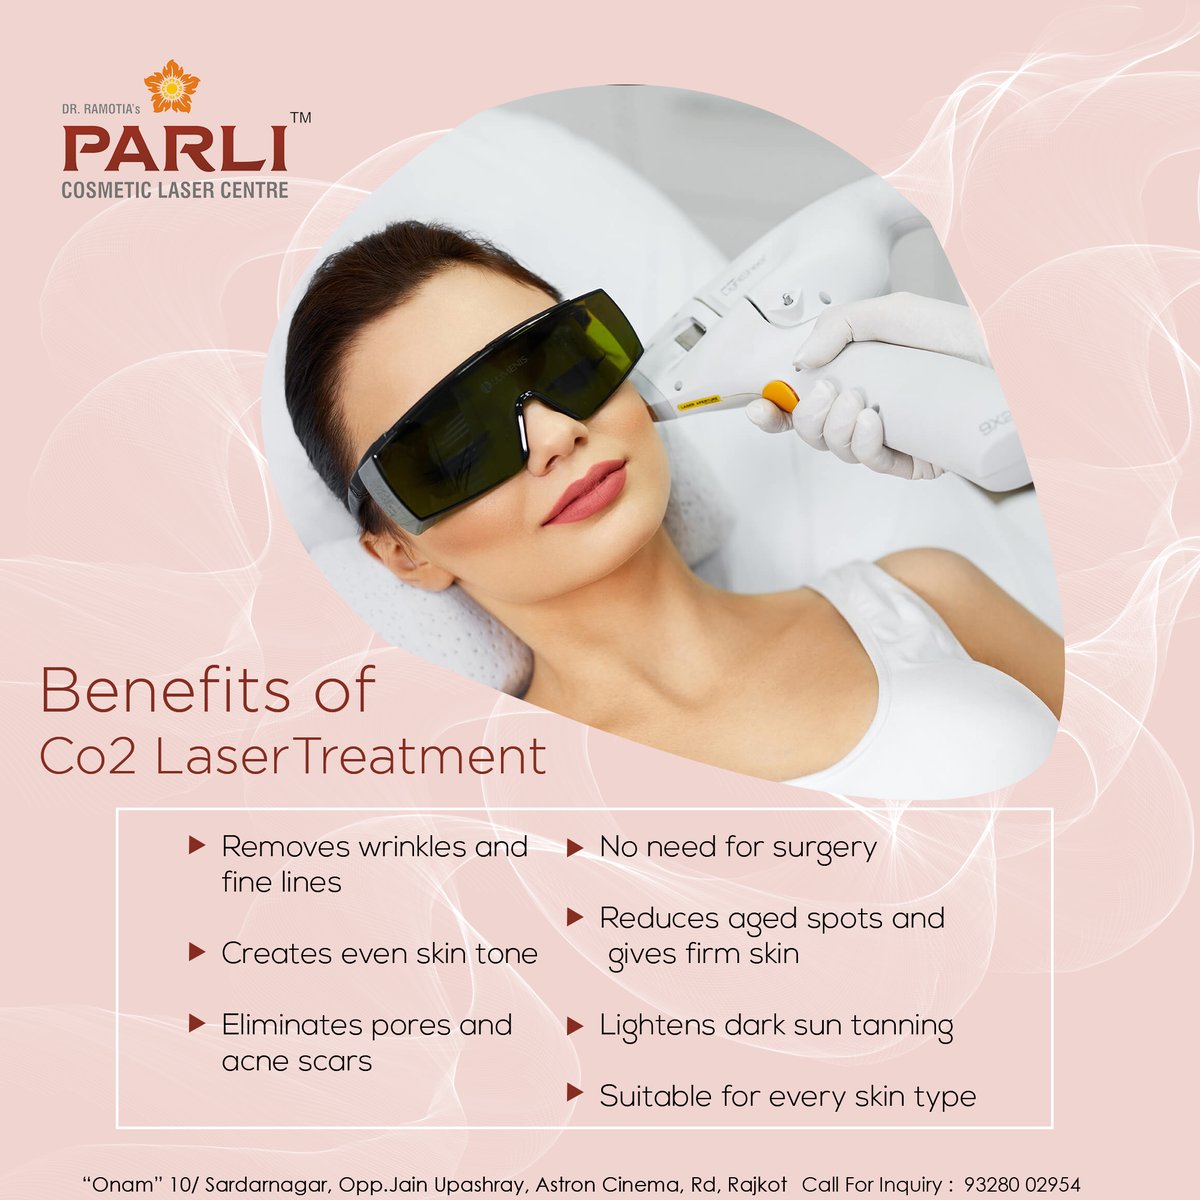 Get the Top #Co2LaserTreatmentinRajkot at #parlicosmeticrajkot

So, Book your Appointment now for #Co2LaserTreatment

parlicosmeticrajkot.com/co2-laser-trea…

#parlirajkot
#parlicosmeticrajkot
#Co2LaserTreatment
#co2laser
#co2laserfacial
#co2lasermachine
#co2laserresurfacing